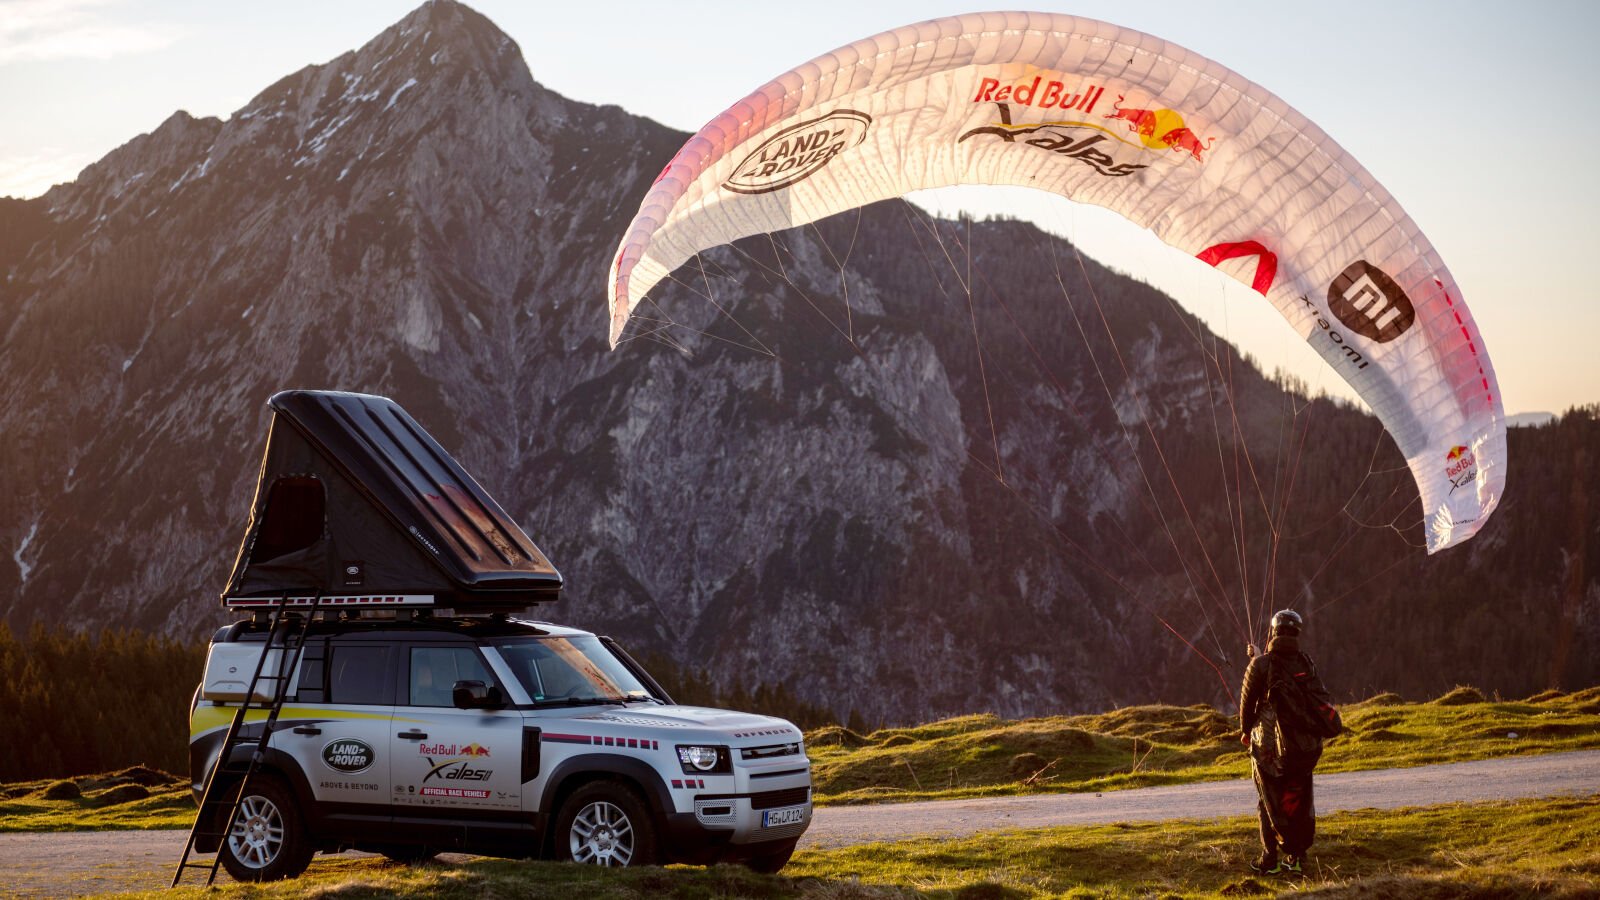 DEFENDER SUPPORTS THE WORLD’S TOUGHEST ADVENTURE RACE